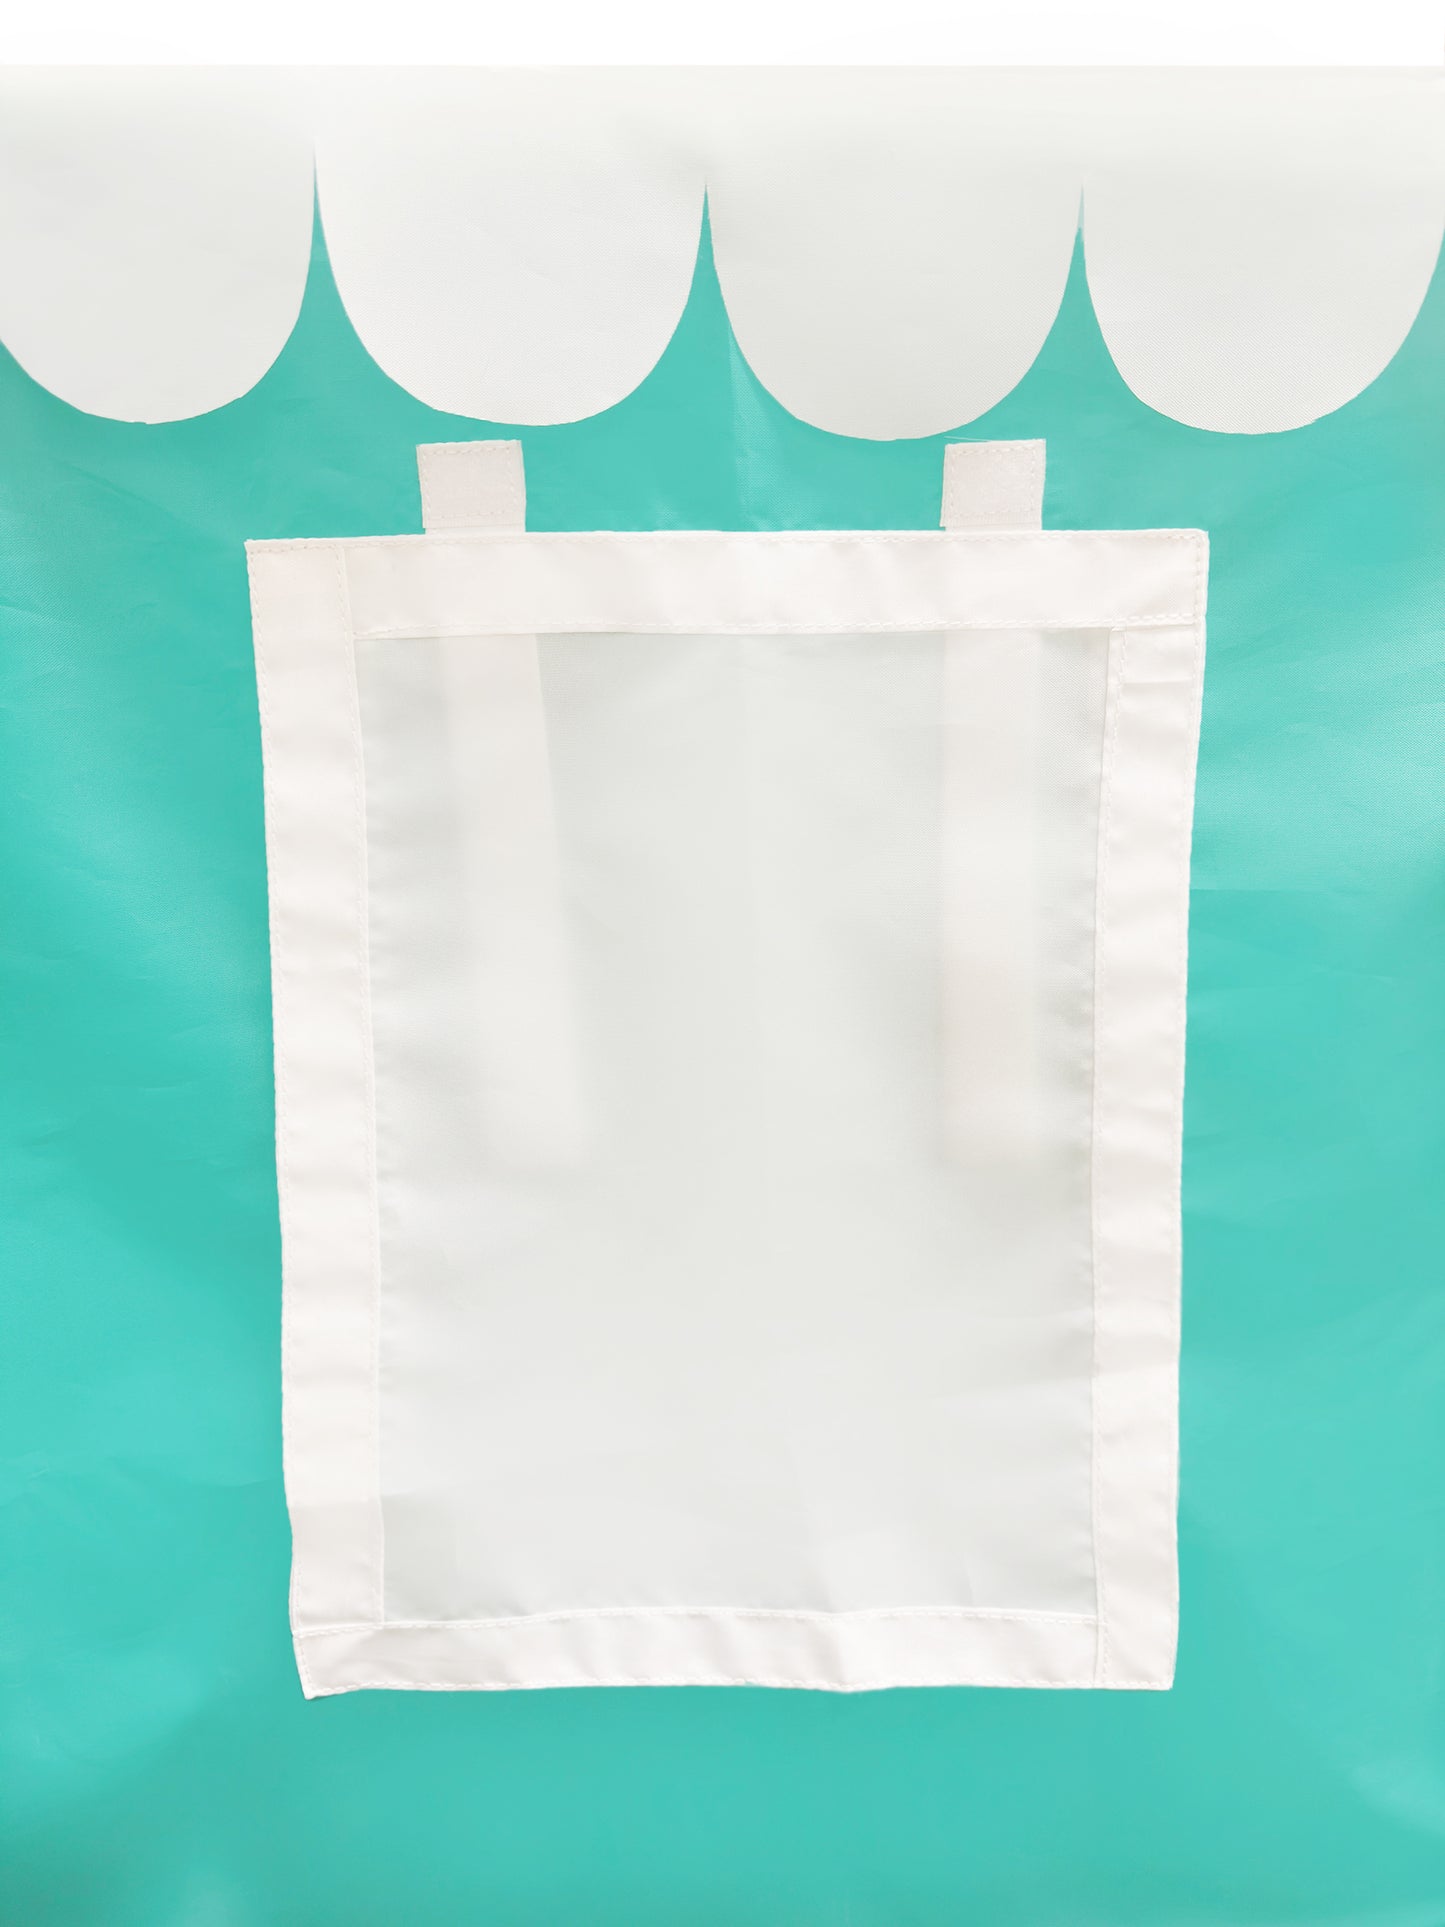 TABLE TENT TEAL